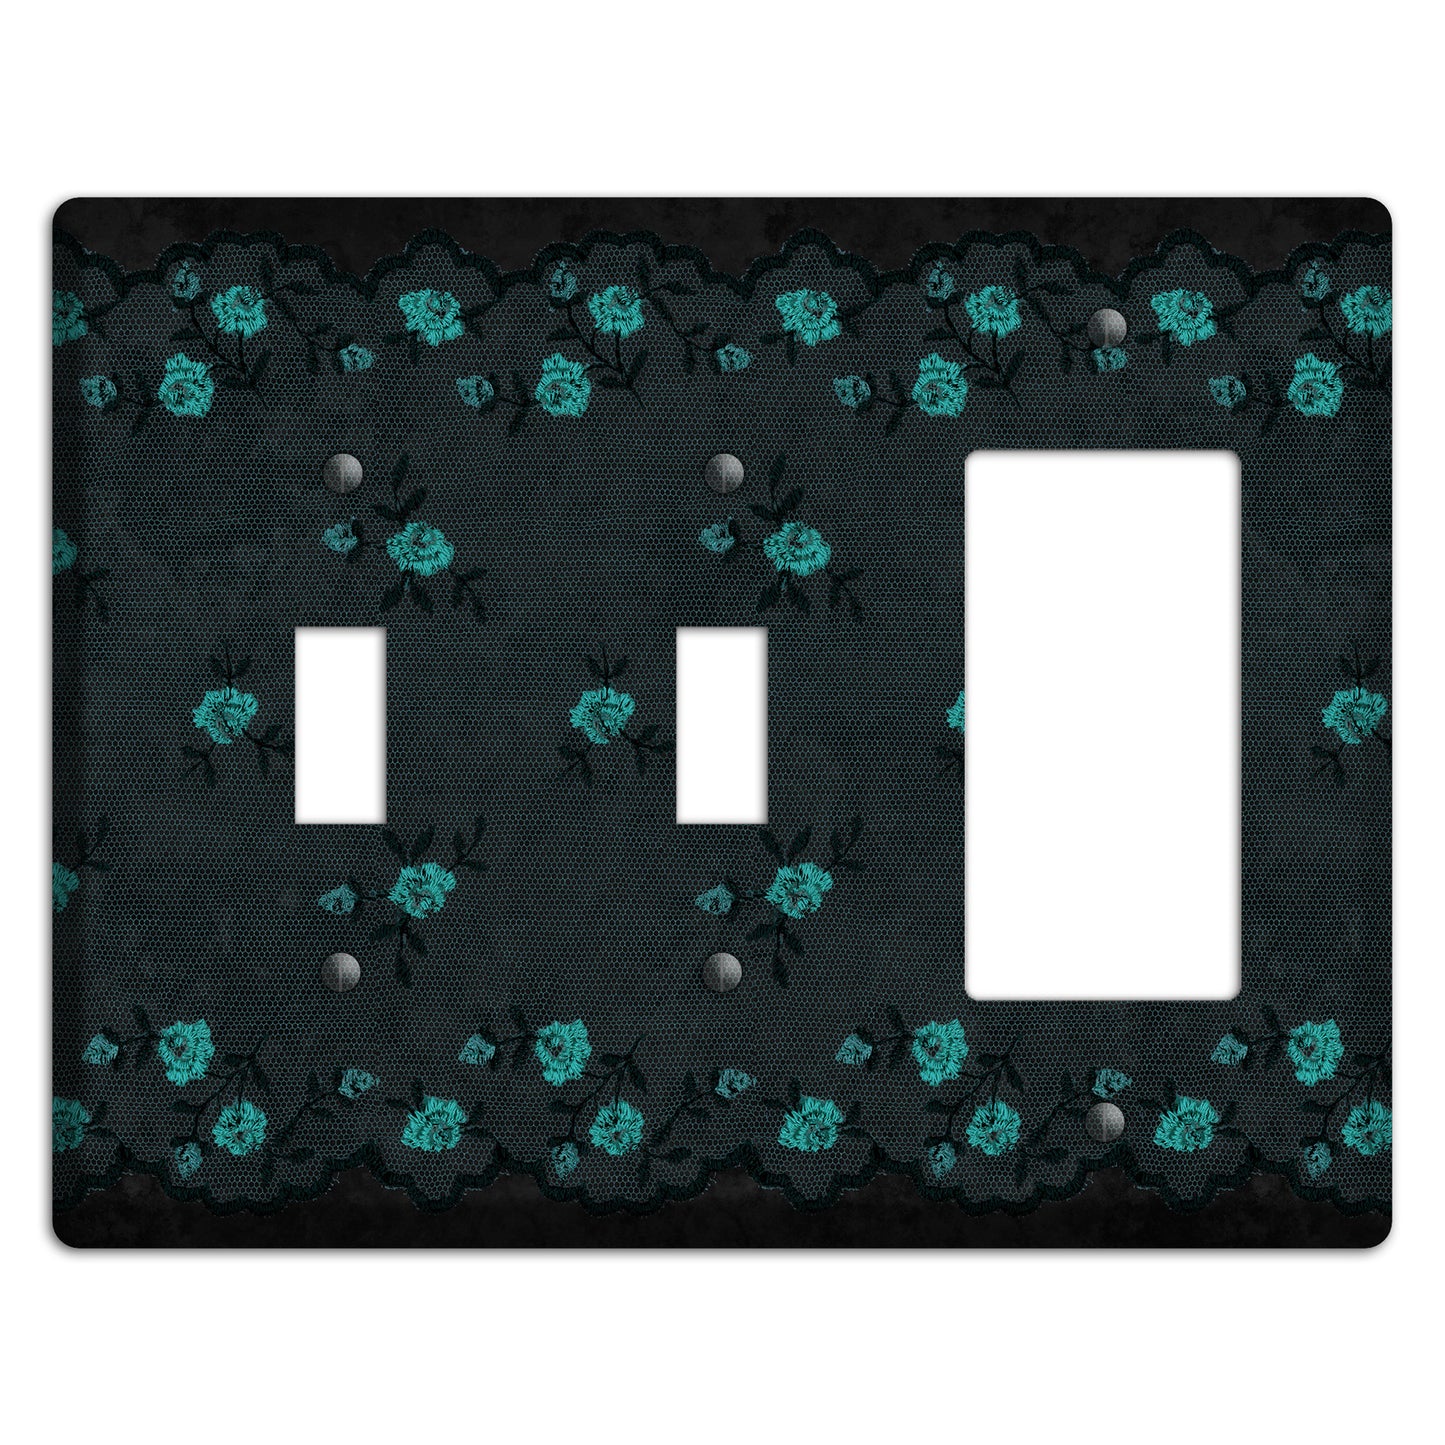 Embroidered Floral Black 2 Toggle / Rocker Wallplate